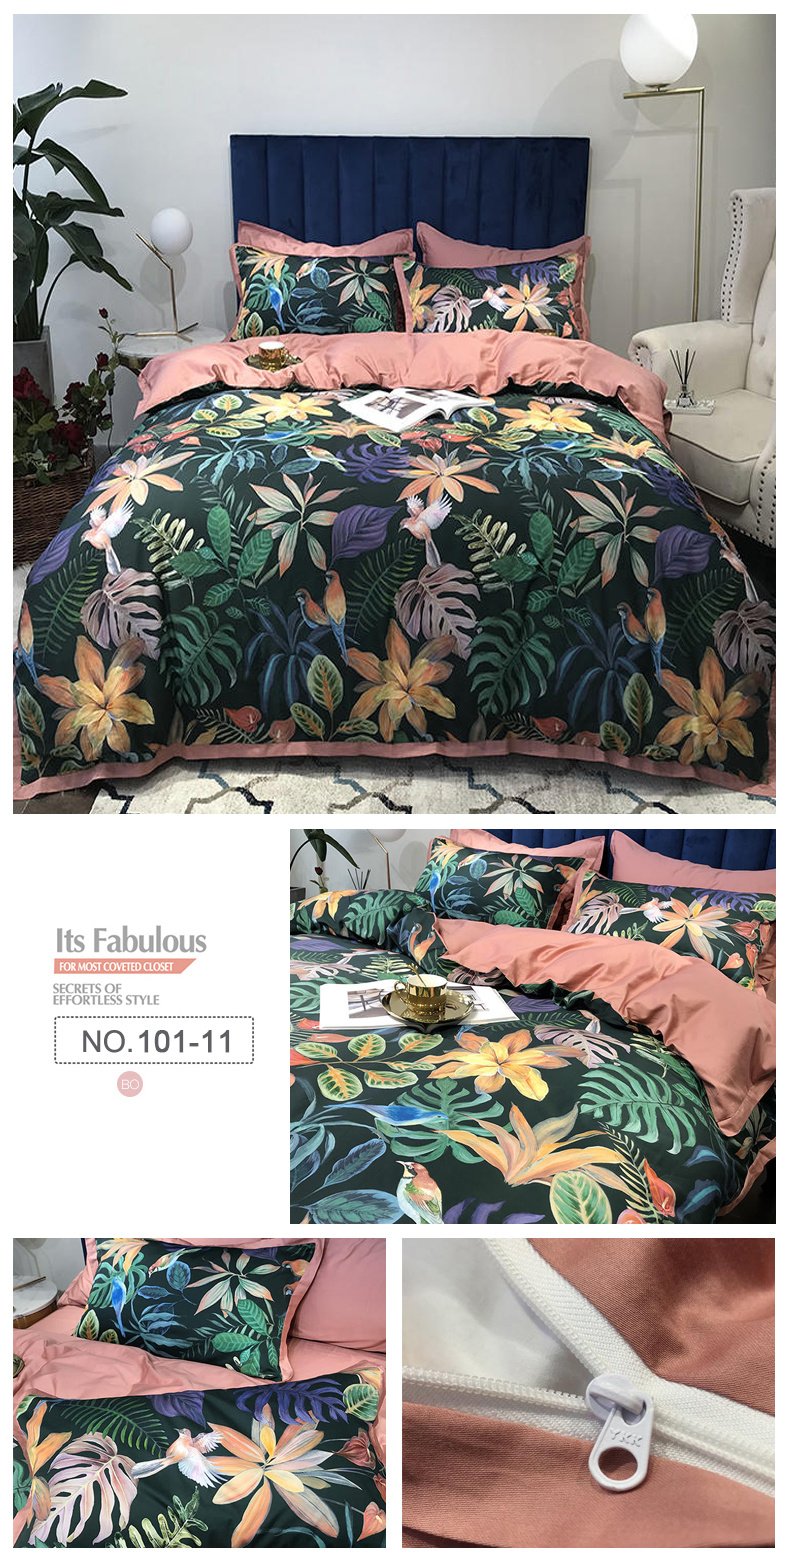 New Product Fashion Style Bed Linen Cotton Printed Soft for 4PCS Double Bed Sheet